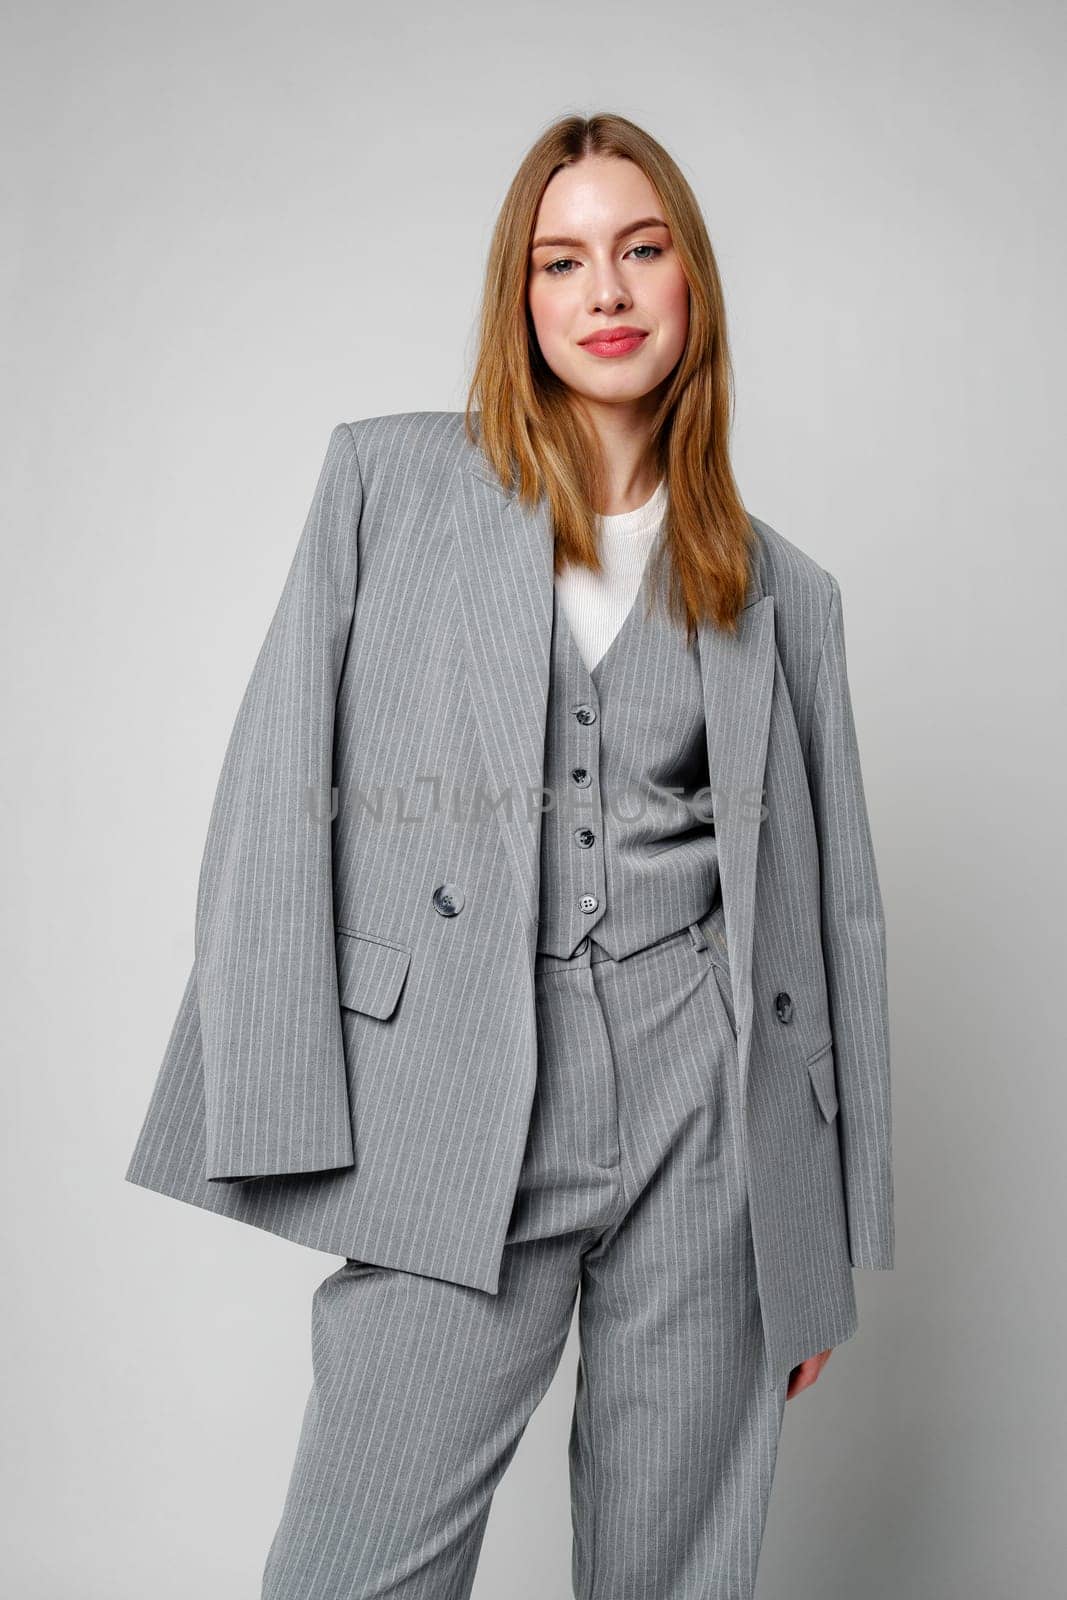 Woman in Gray Suit and White Shirt posing in studio by Fabrikasimf